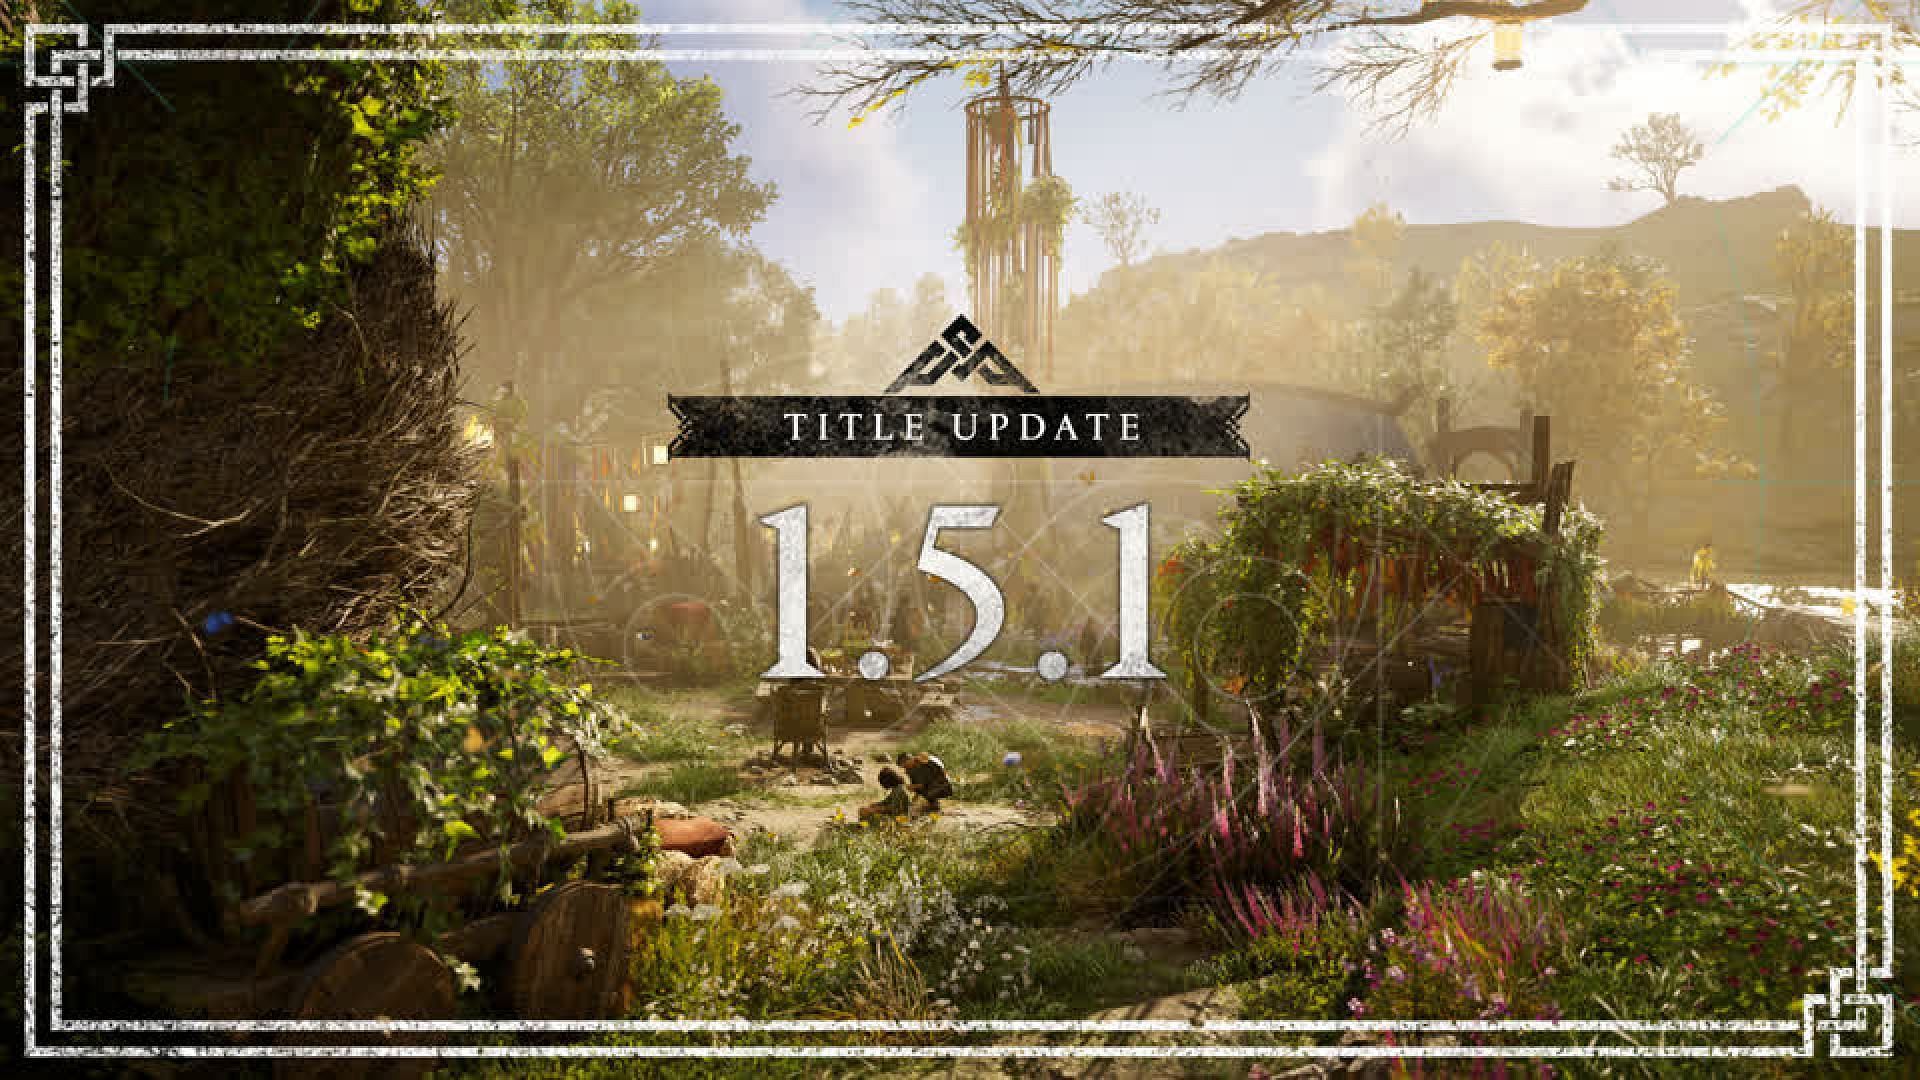 Assassin&rsquo;s Creed Valhalla title update 1.5.1 (Image by Ubisoft)